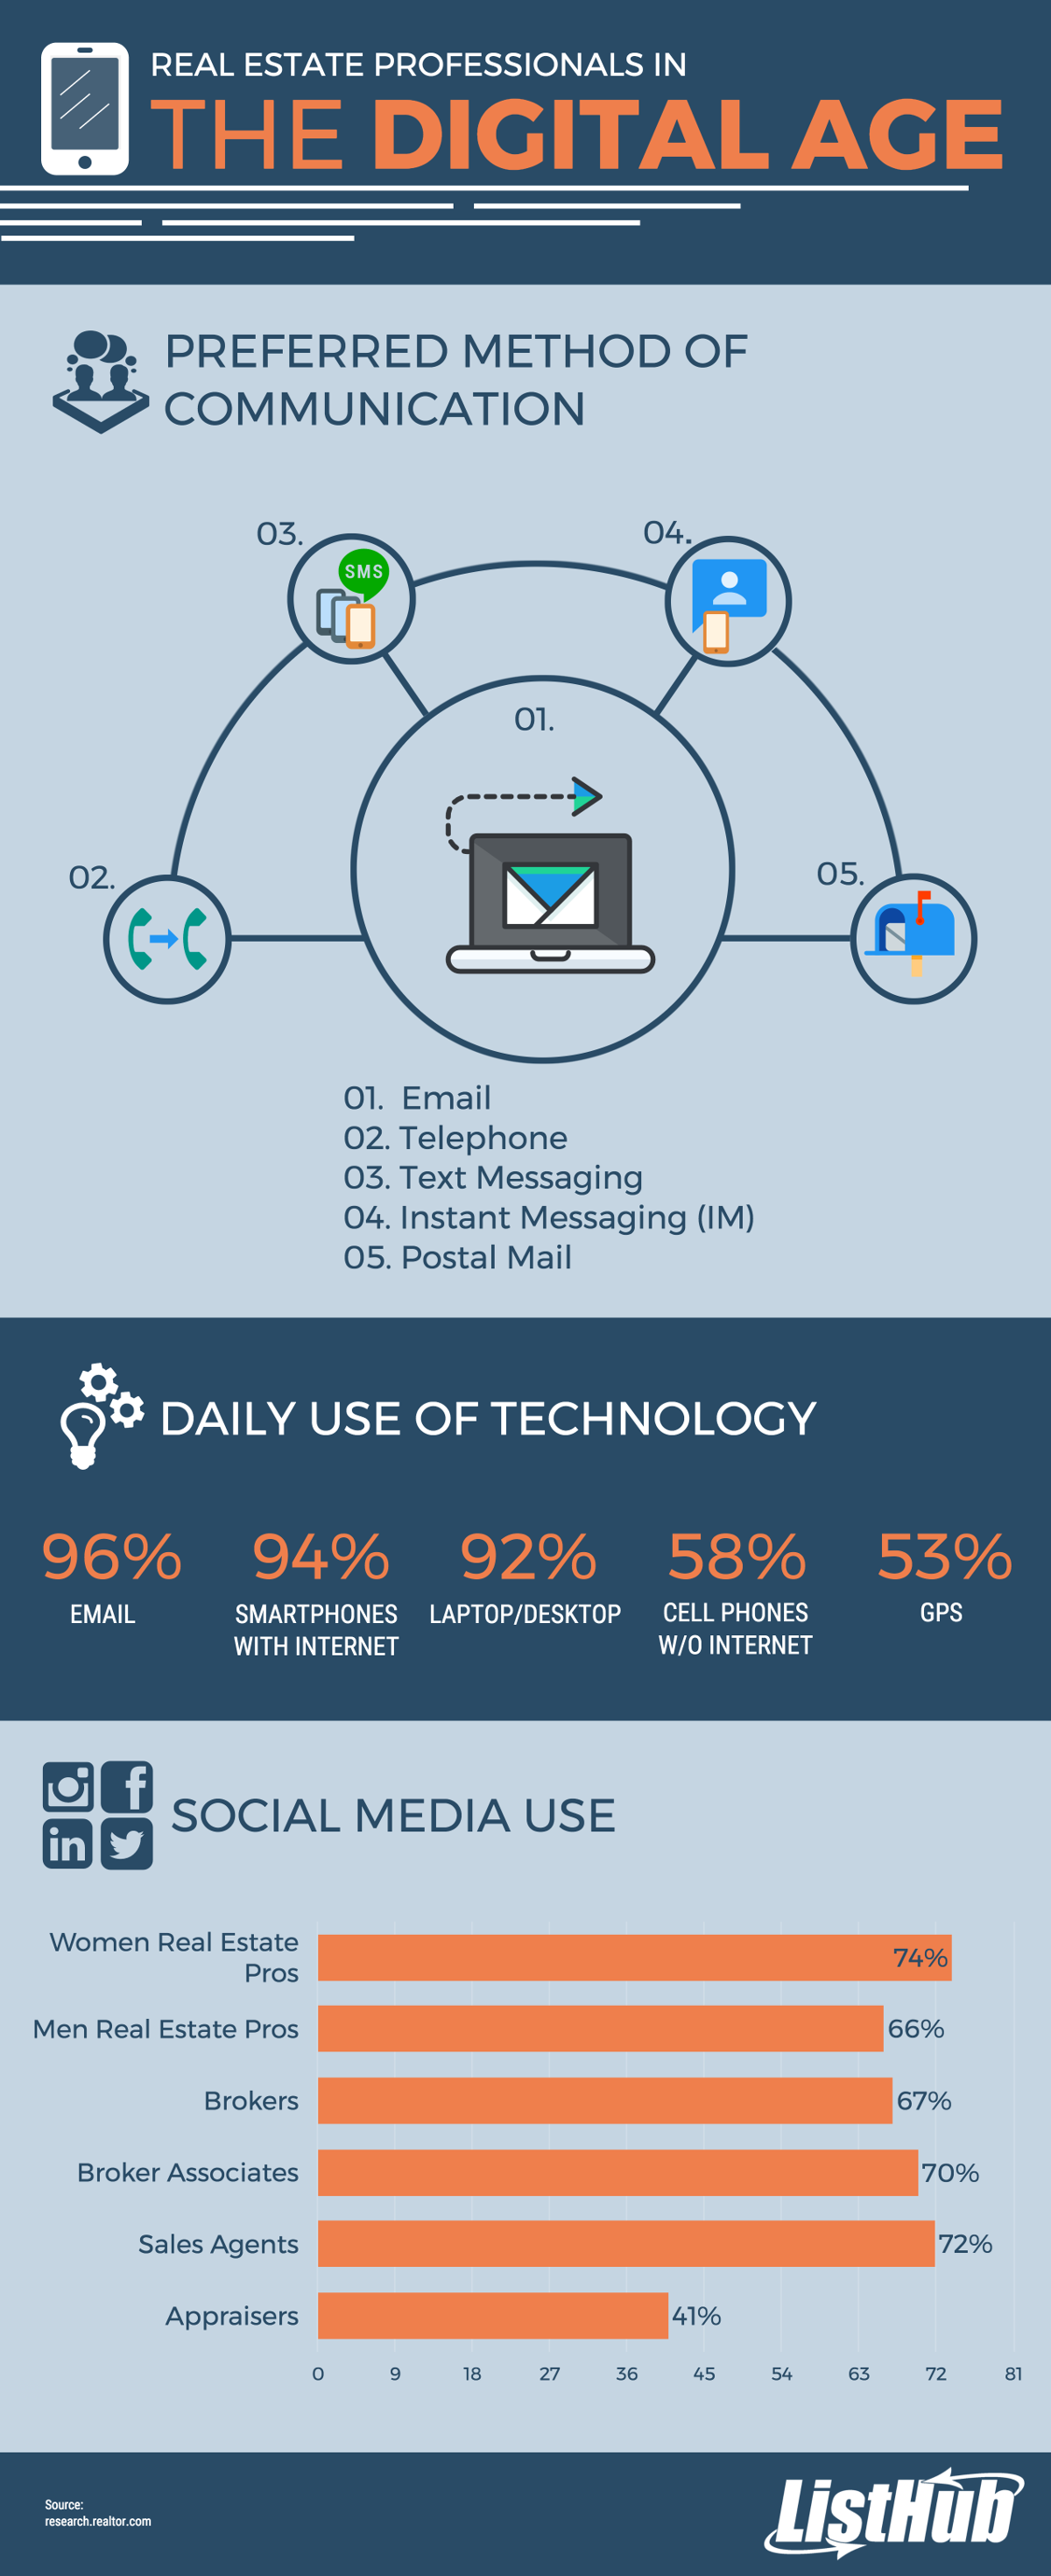 listhub infographic how brokerages use tech